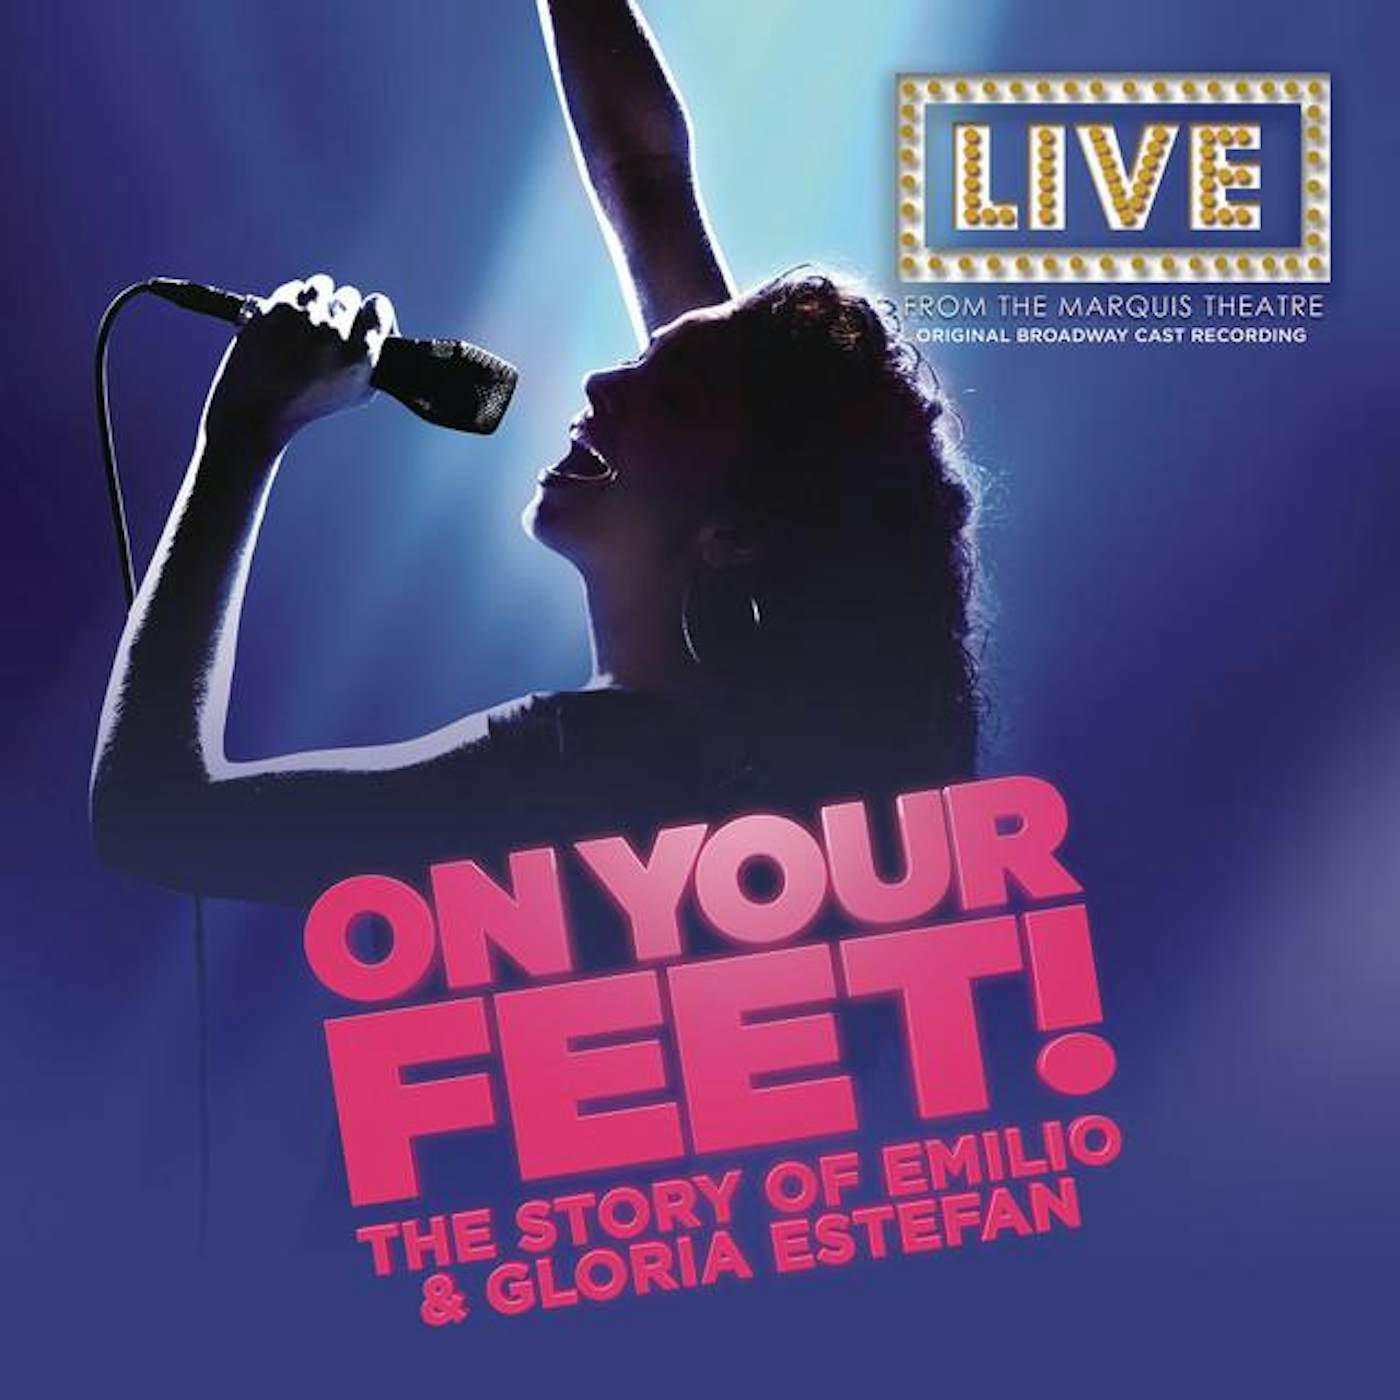 ON YOUR FEET: THE STORY OF EMILIO & GLORIA